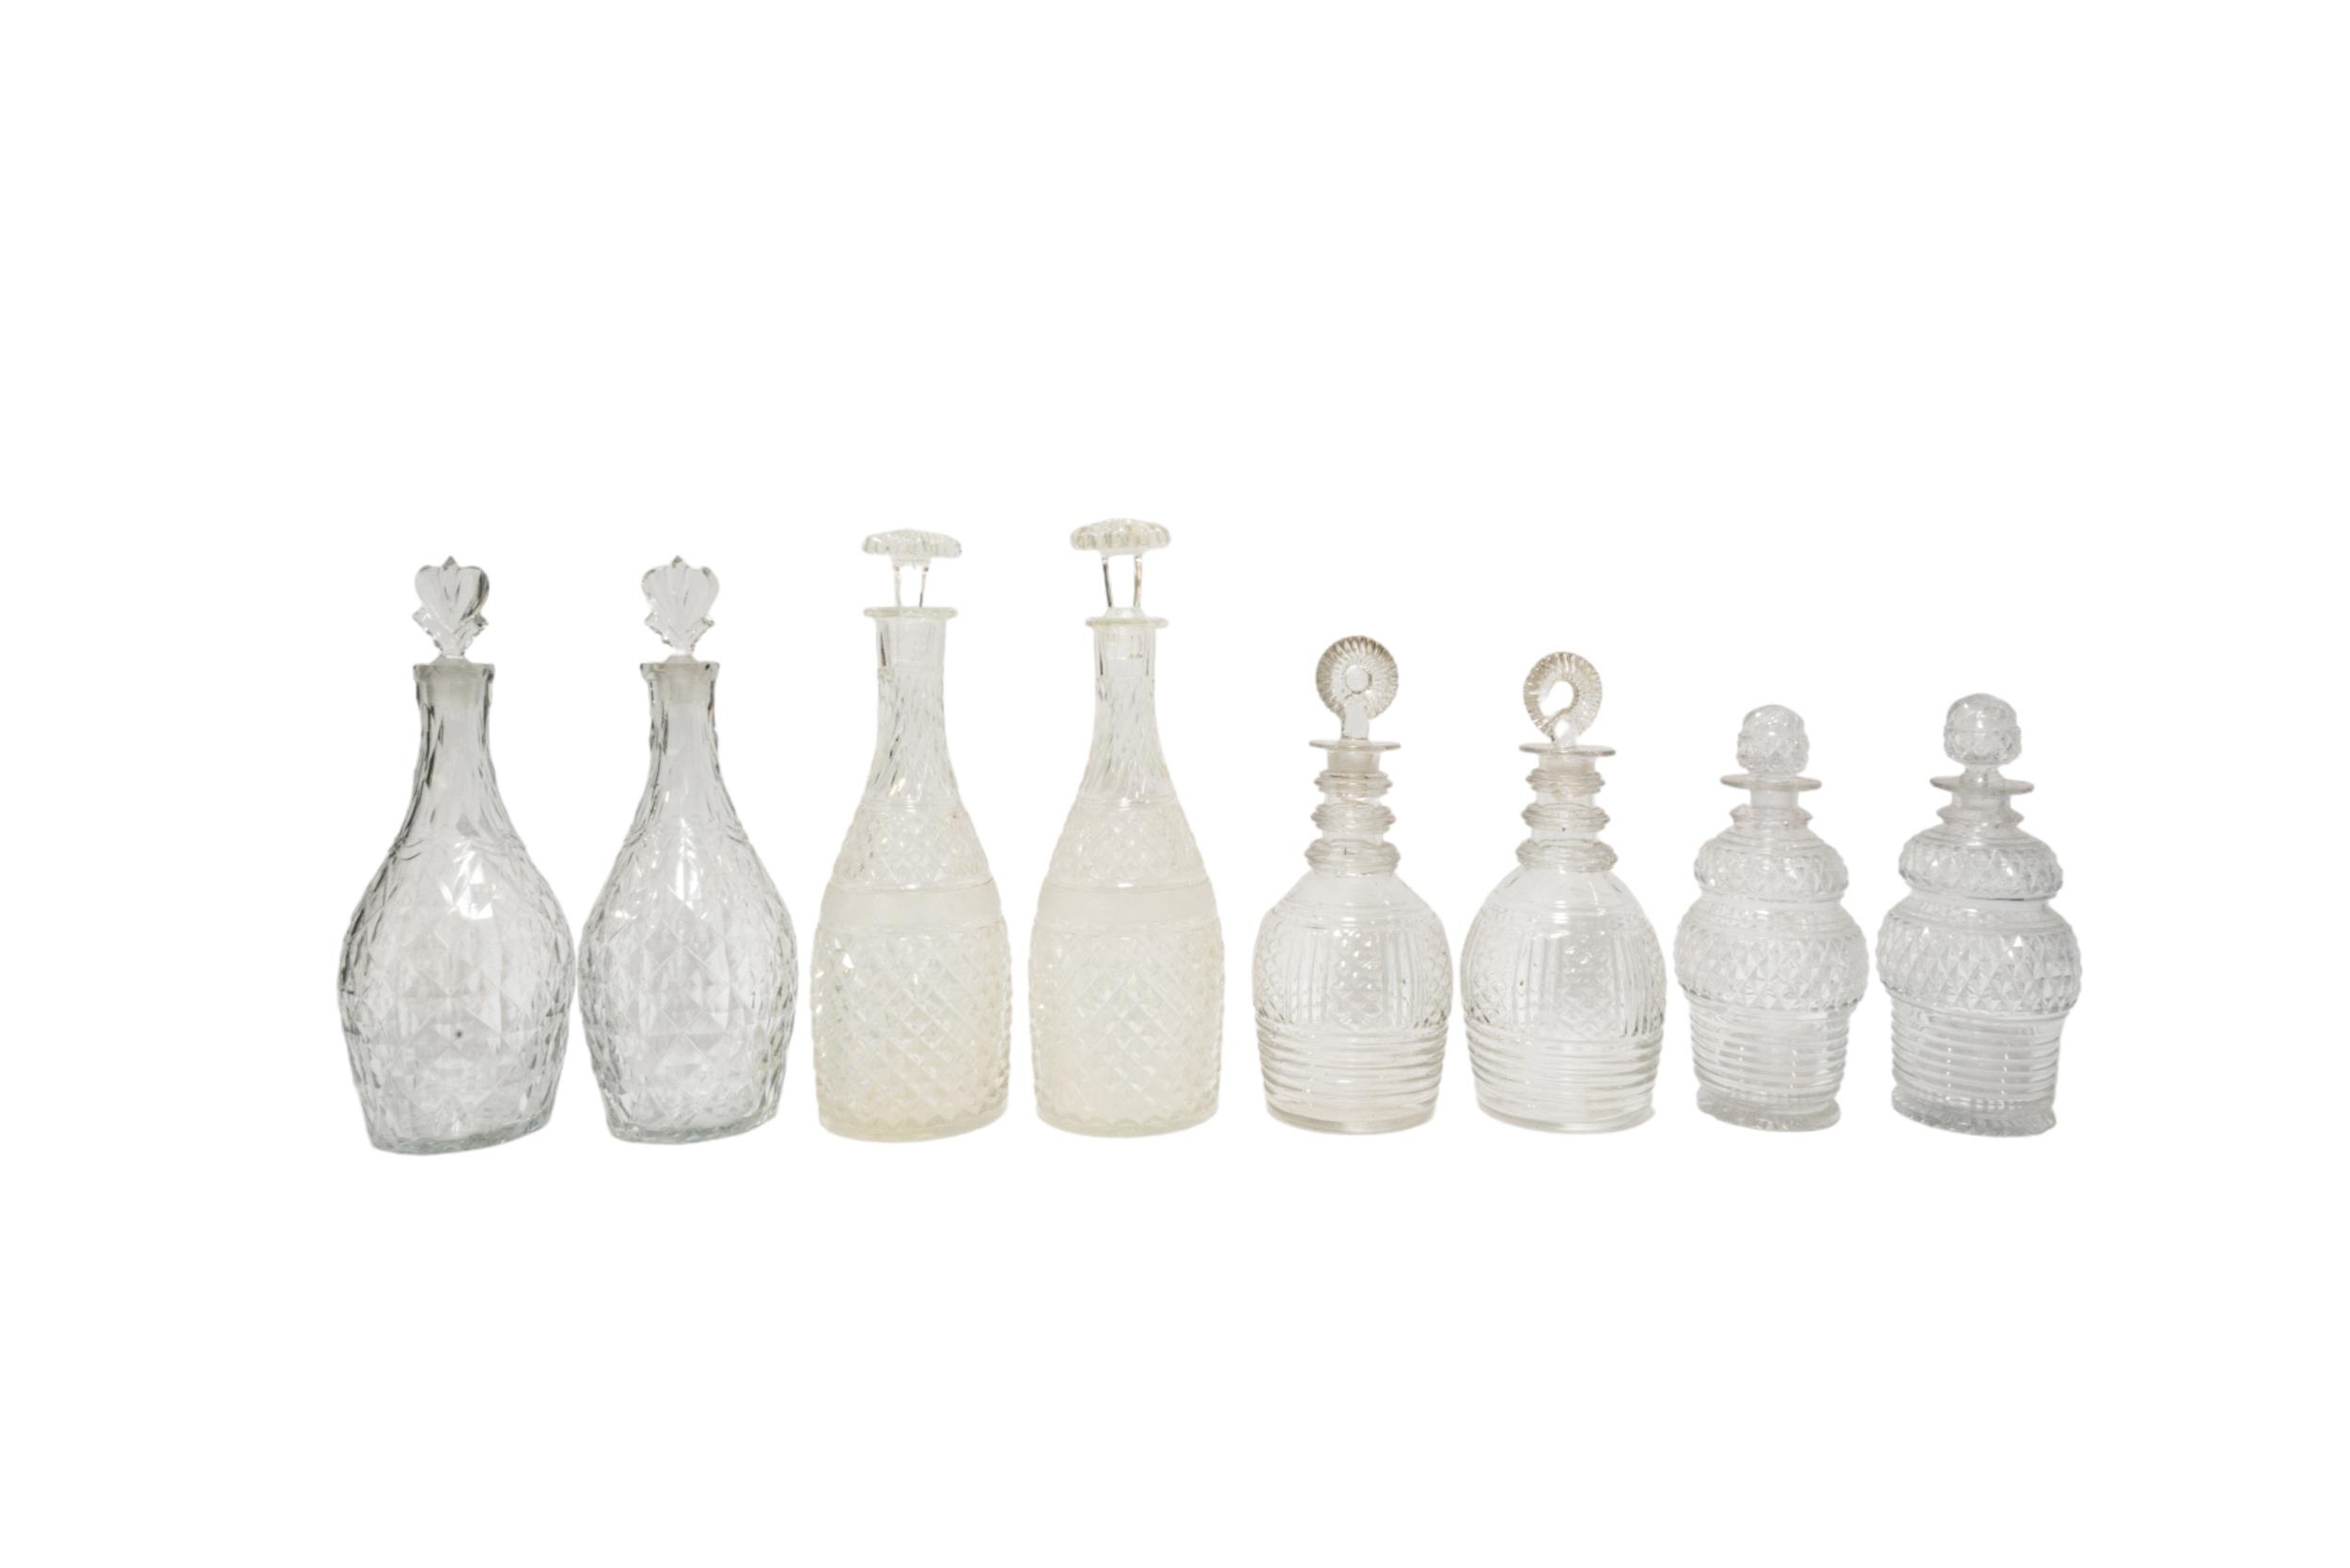 FOUR PAIRS OF VINTAGE GLASS DECANTERS, various sizes and styles, cut glass and moulded glass